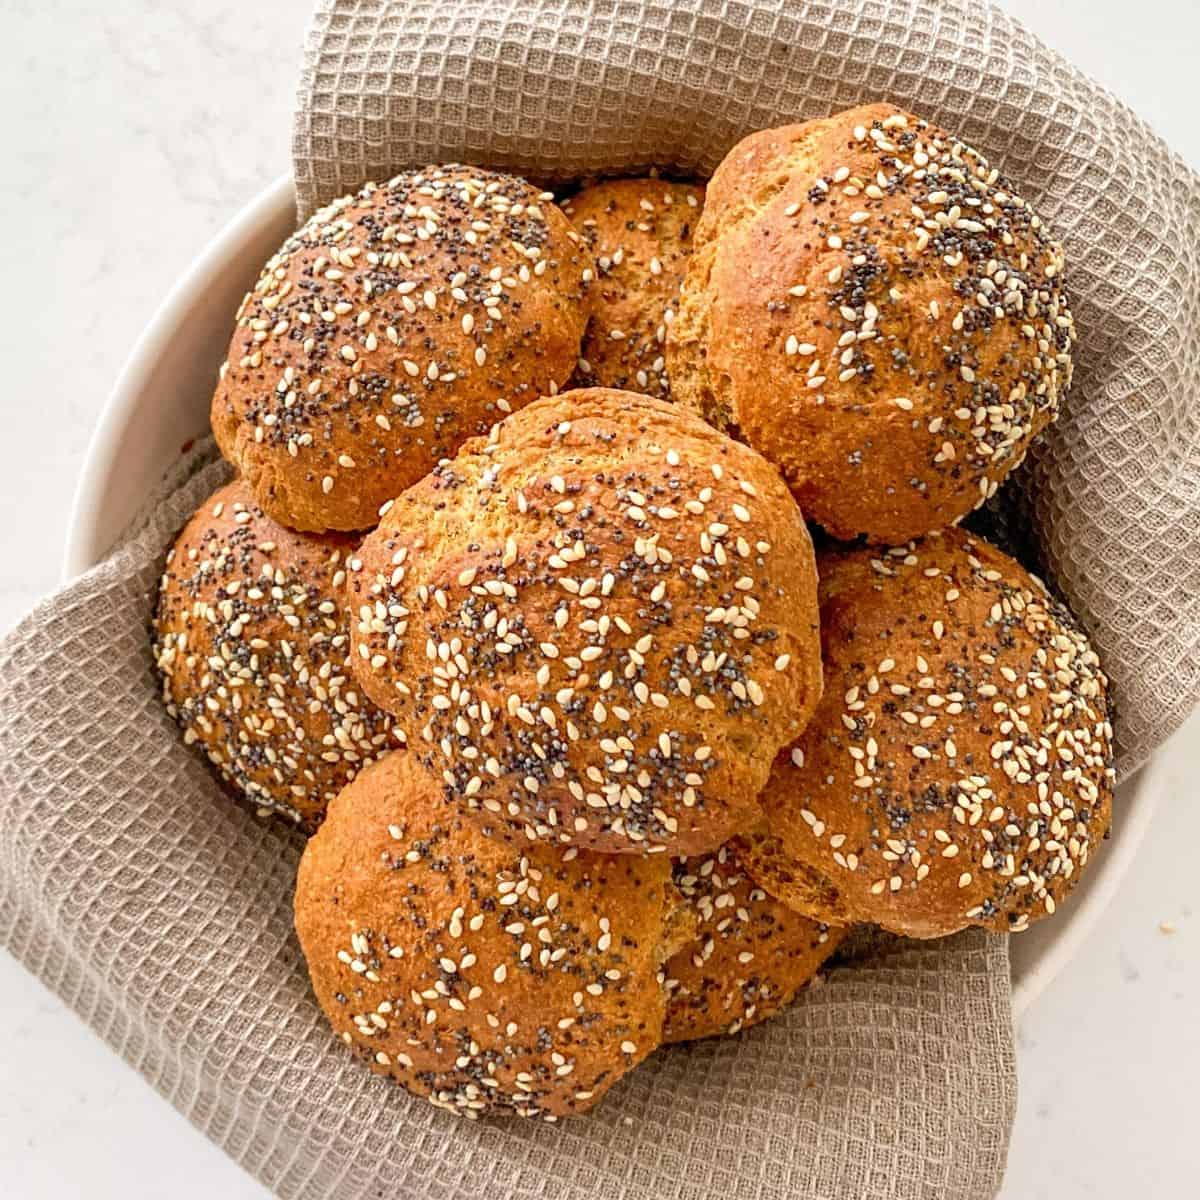 Basket filled with hamburger buns with seeds on top.